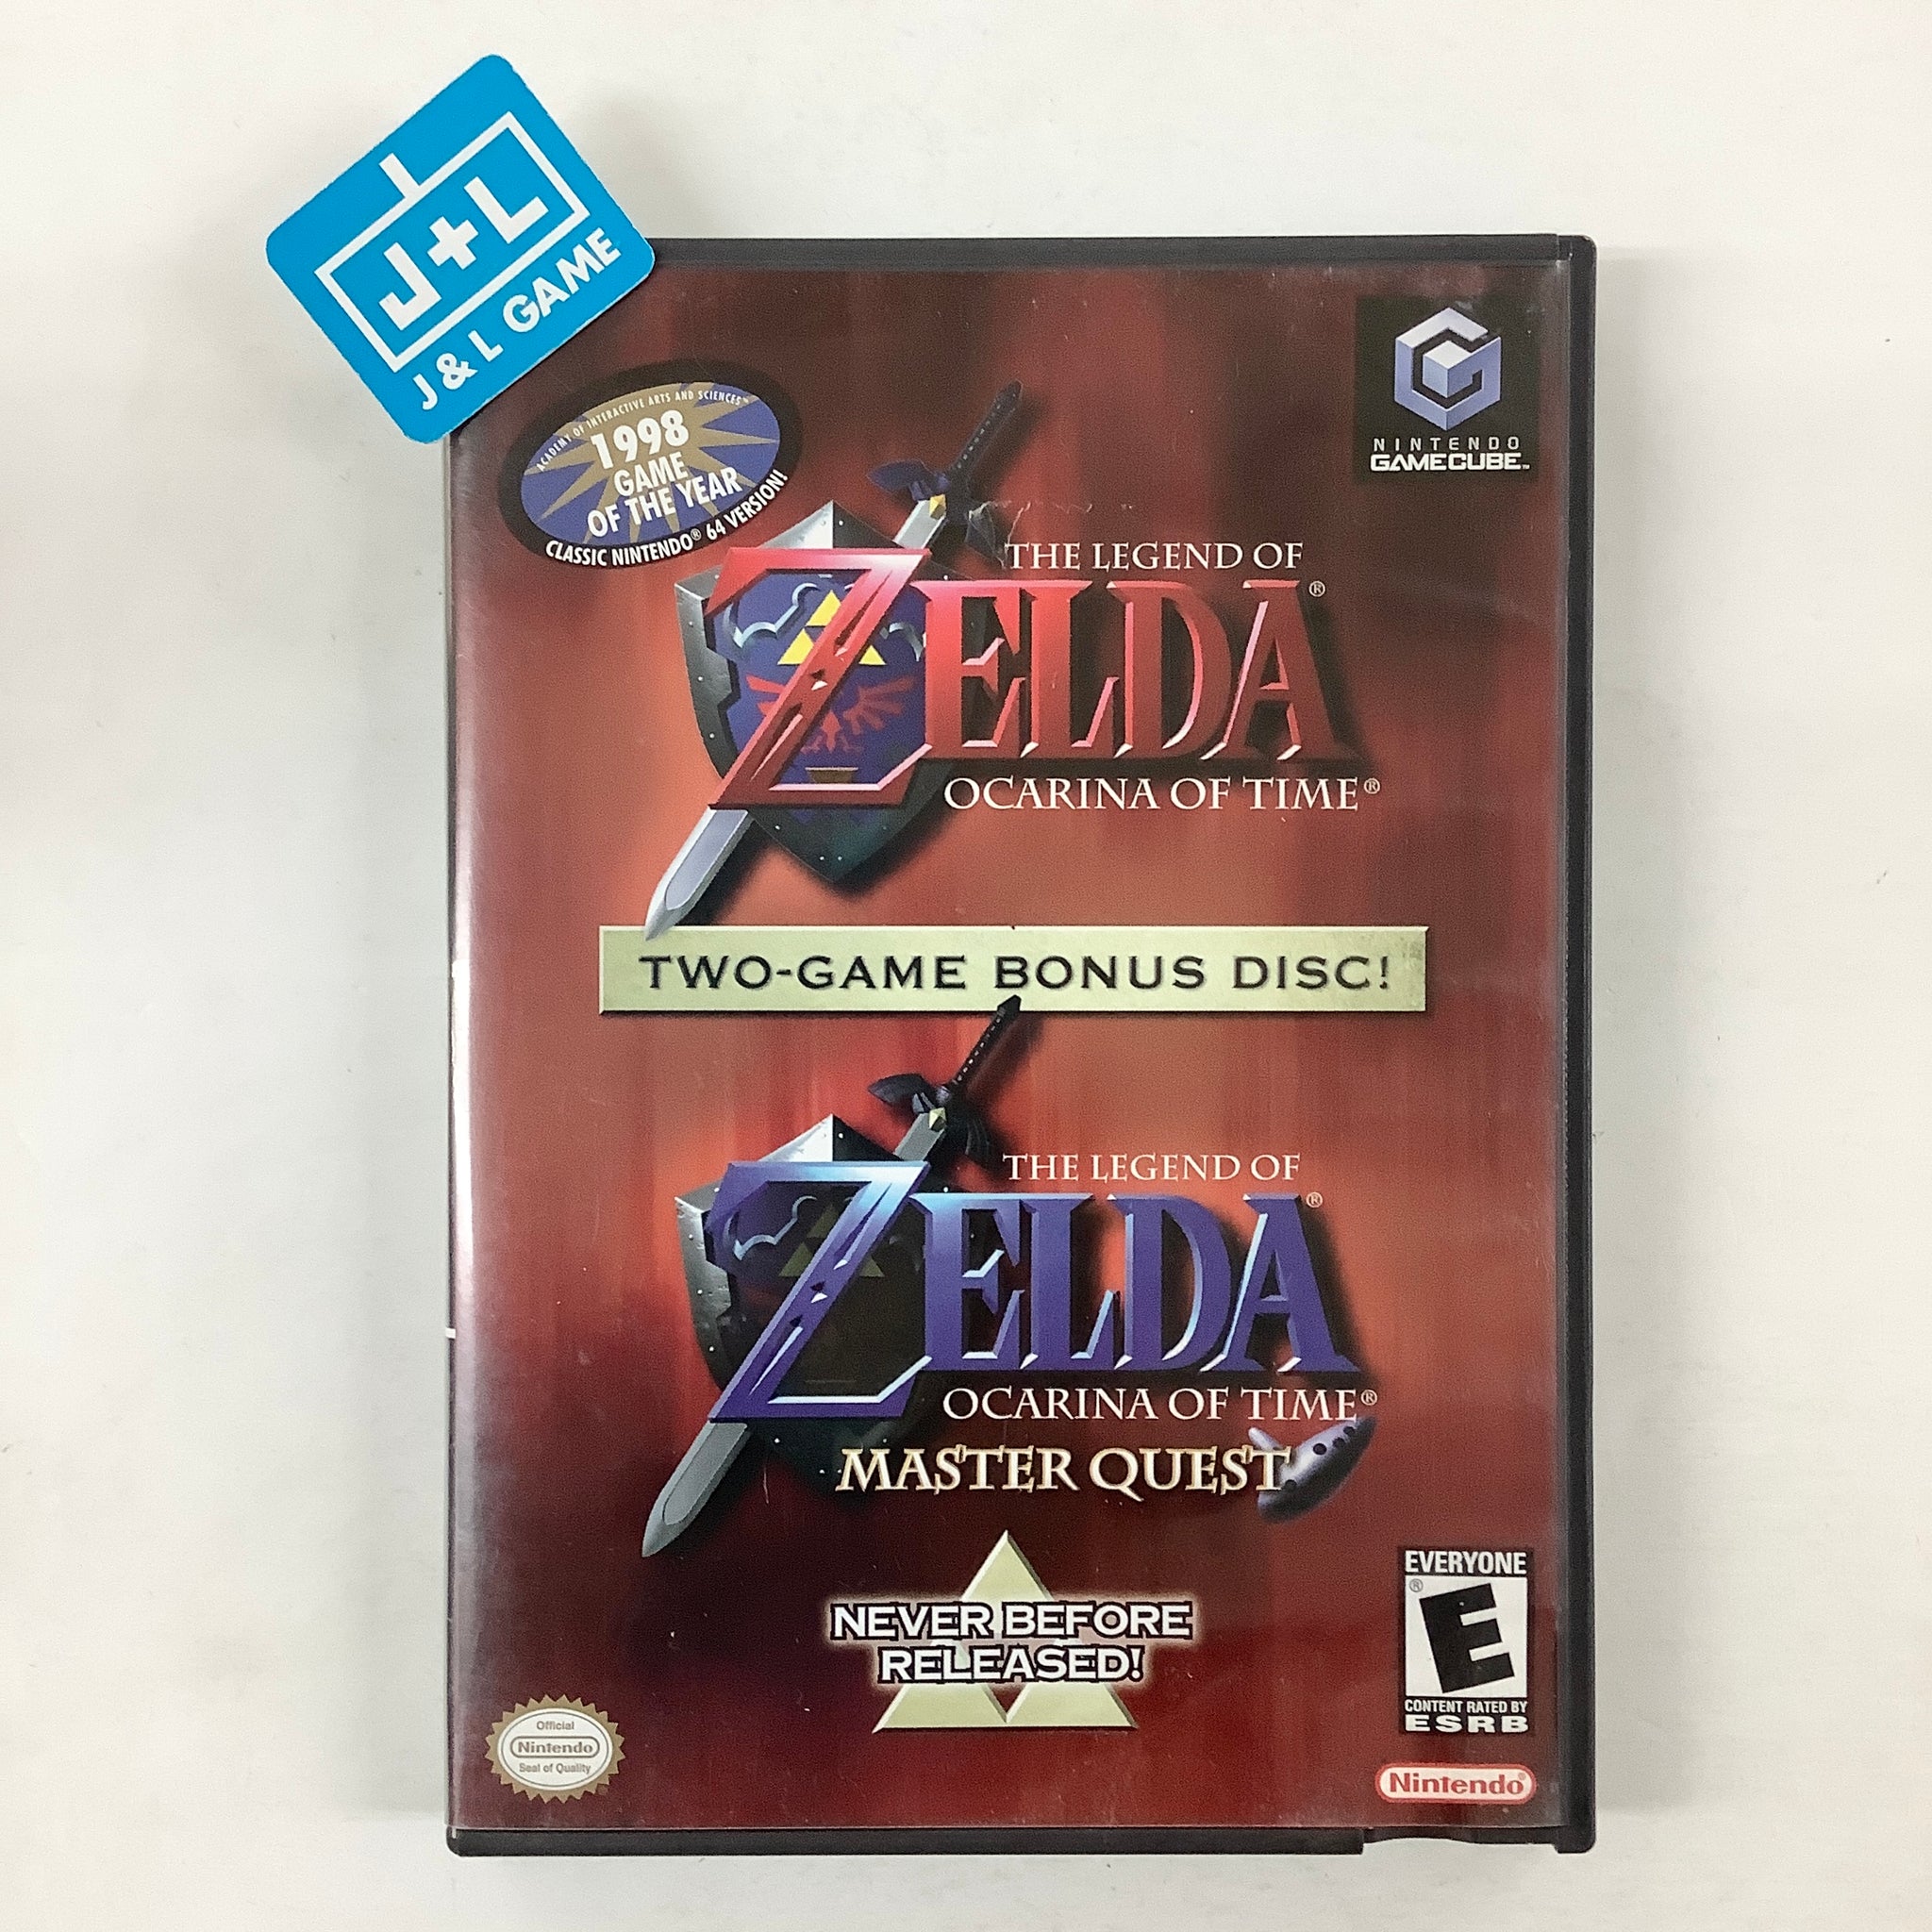  The Legend of Zelda: Ocarina of Time (w/ Master Quest